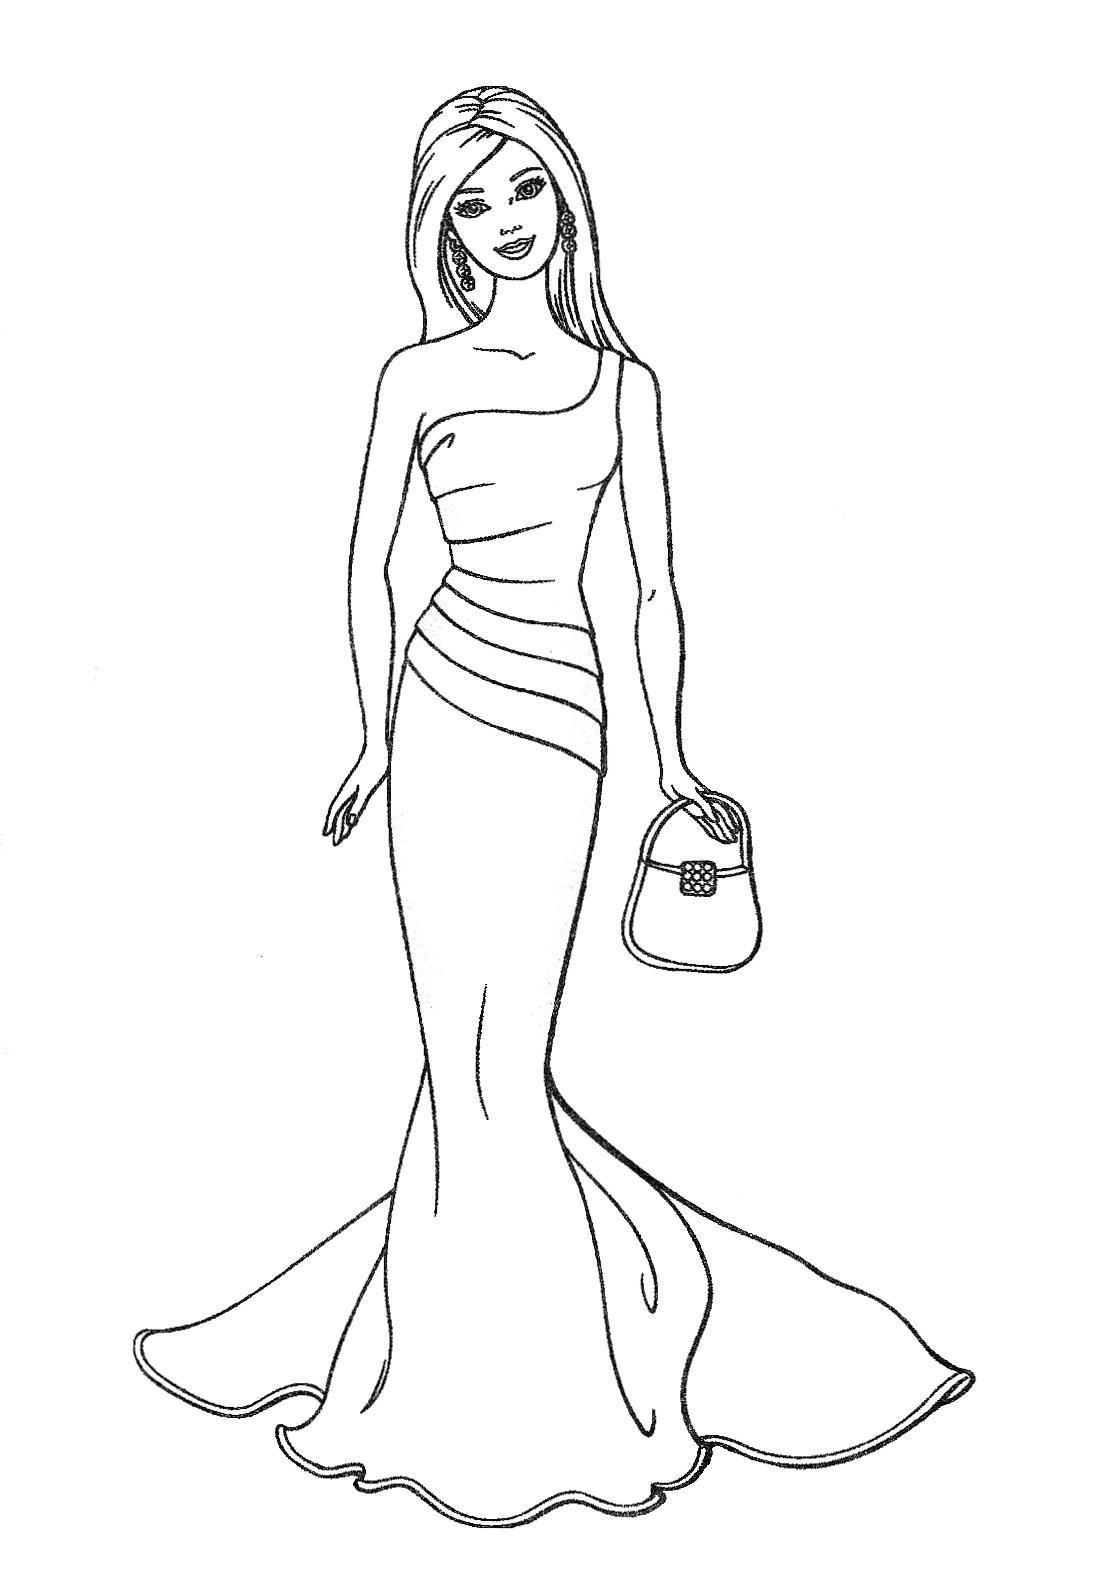 barbie doll coloring pages barbie and ken coloring pages free download nyomtatható coloring pages barbie doll 